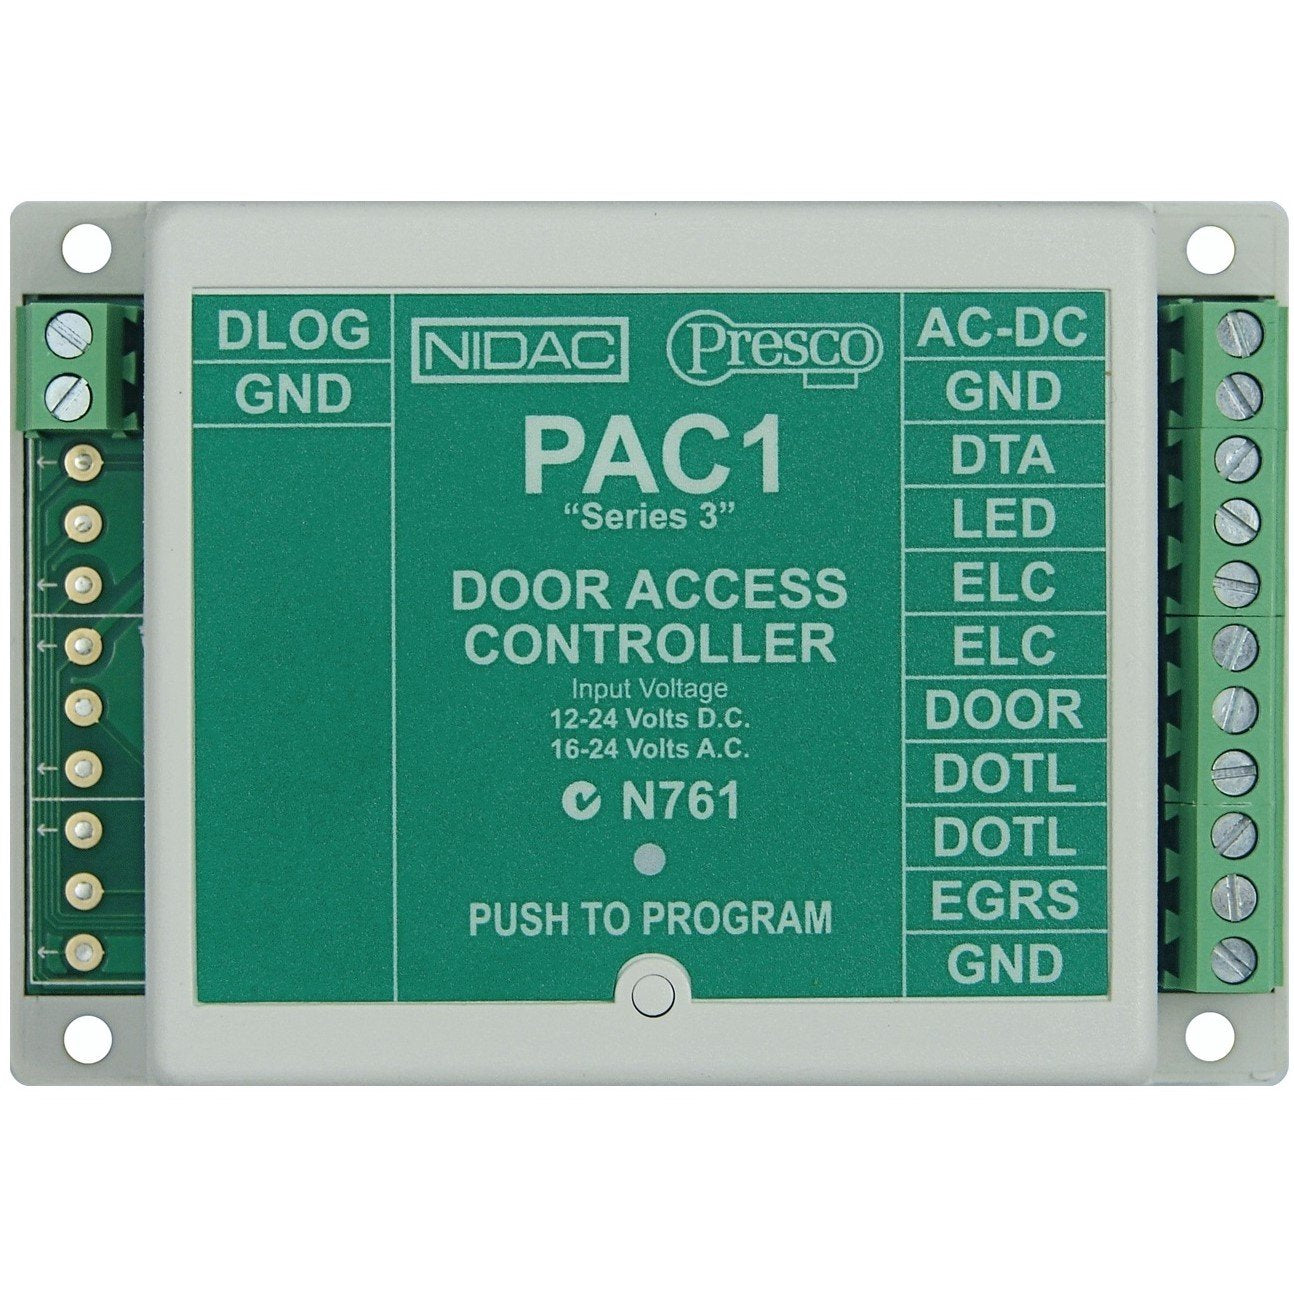 **SALE** Nidac* Single Door Controller, 600 Users, Programmable Via Keypad Or Using PC With PEL1 / PIM